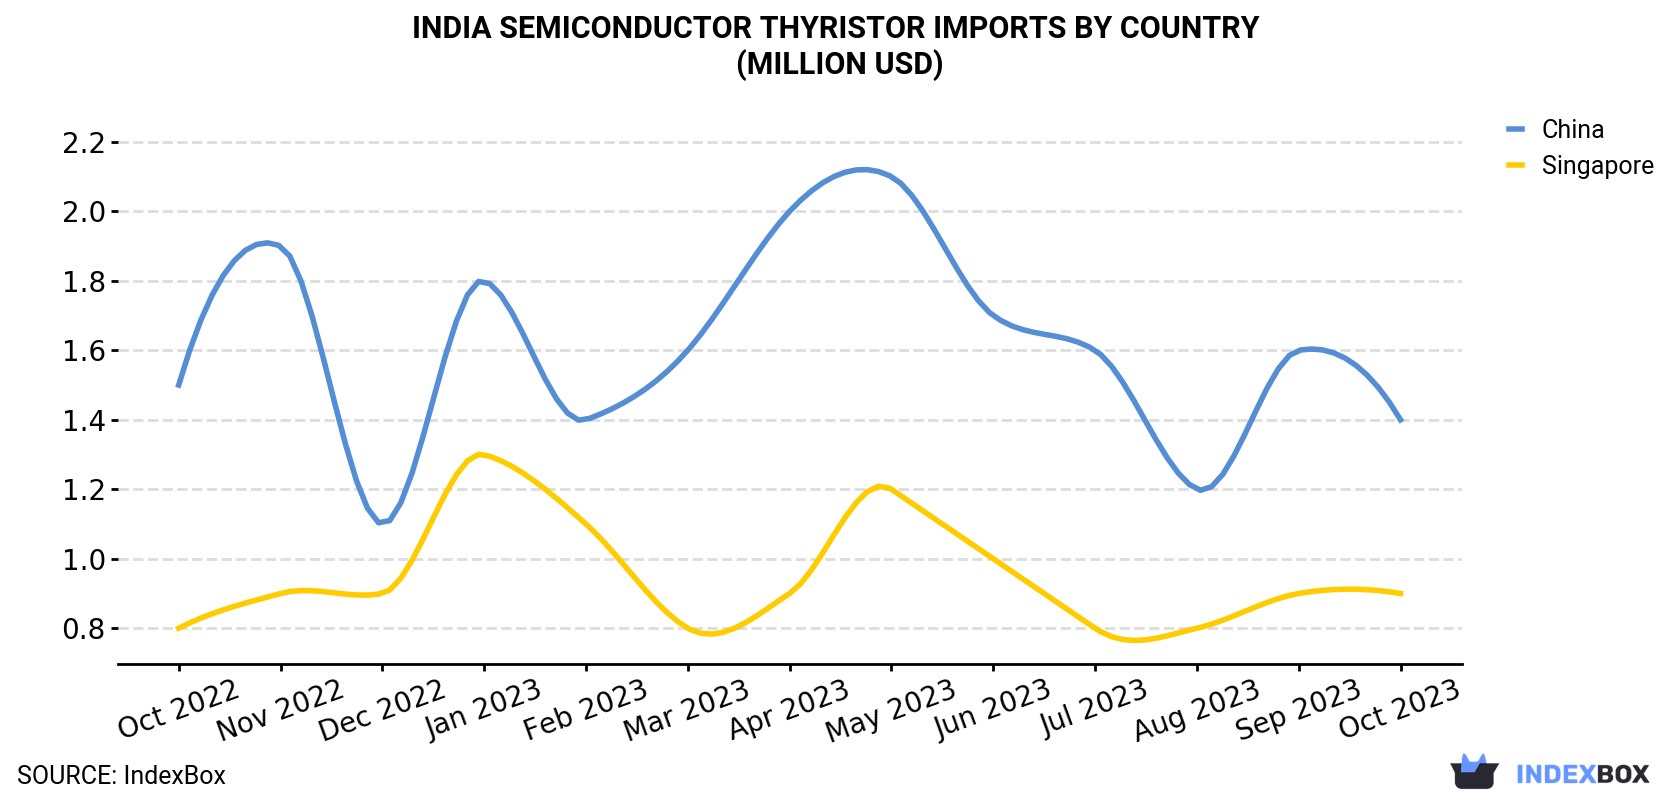 India Semiconductor Thyristor Imports By Country (Million USD)